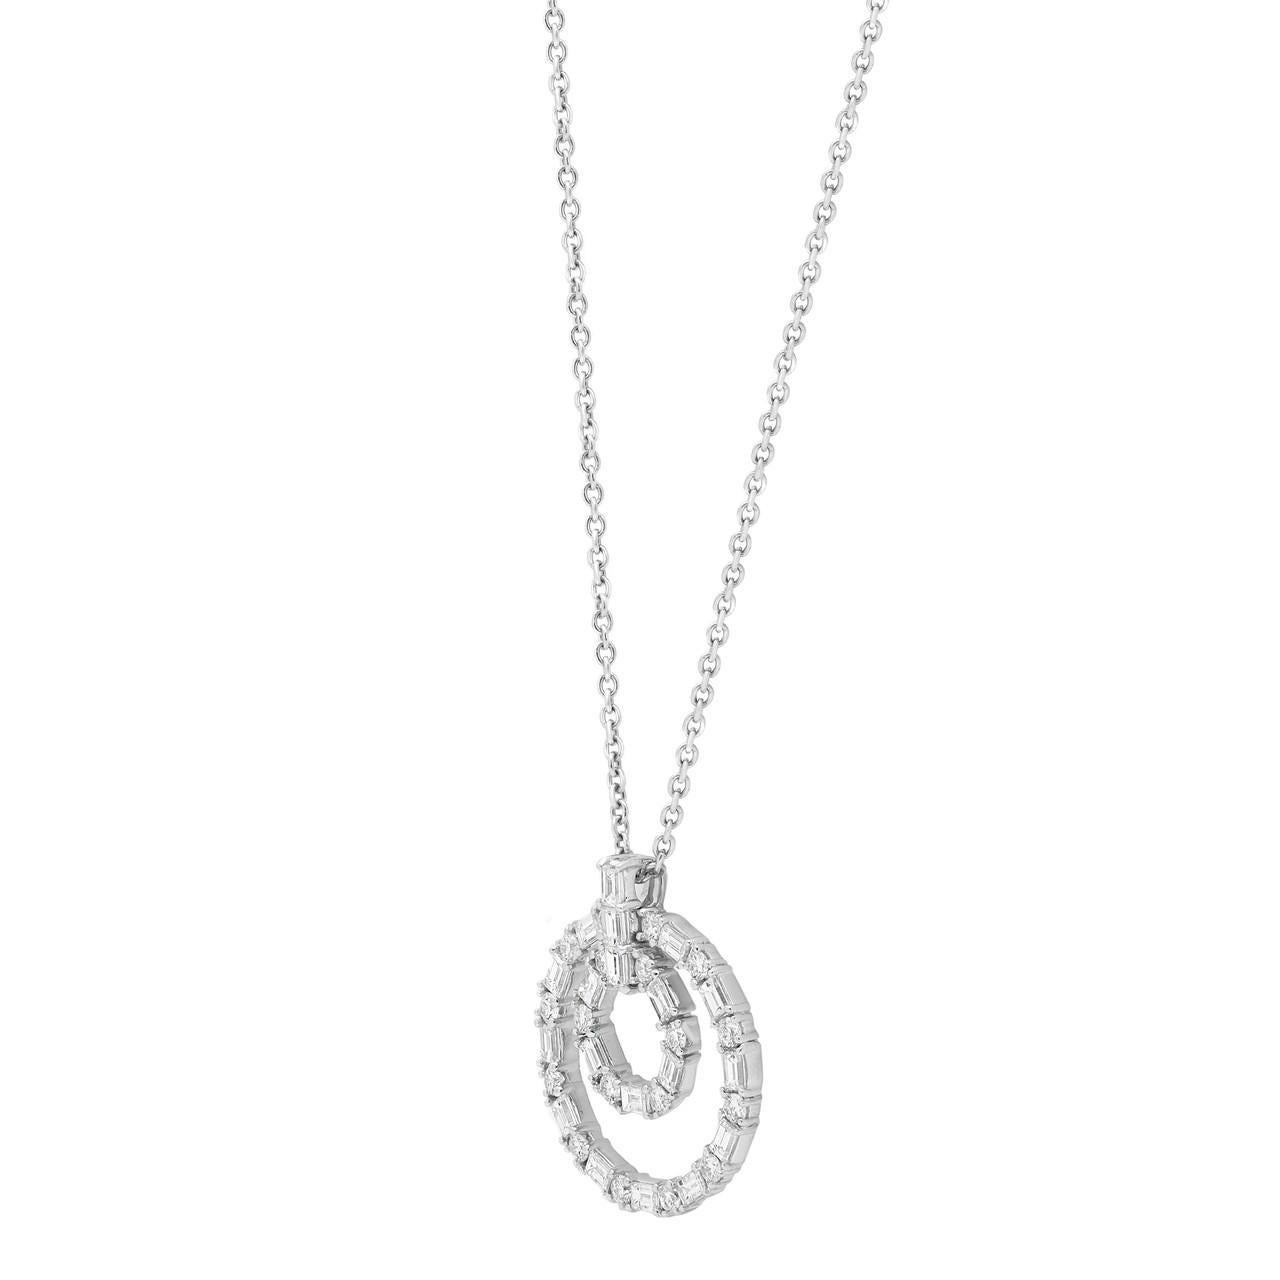 Introducing our irresistibly chic 1.73 Carat Diamond Circle Pendant Necklace in 18K White Gold. This necklace is a true embodiment of elegance and sophistication. Crafted with meticulous attention to detail, the delicate pendant features a small